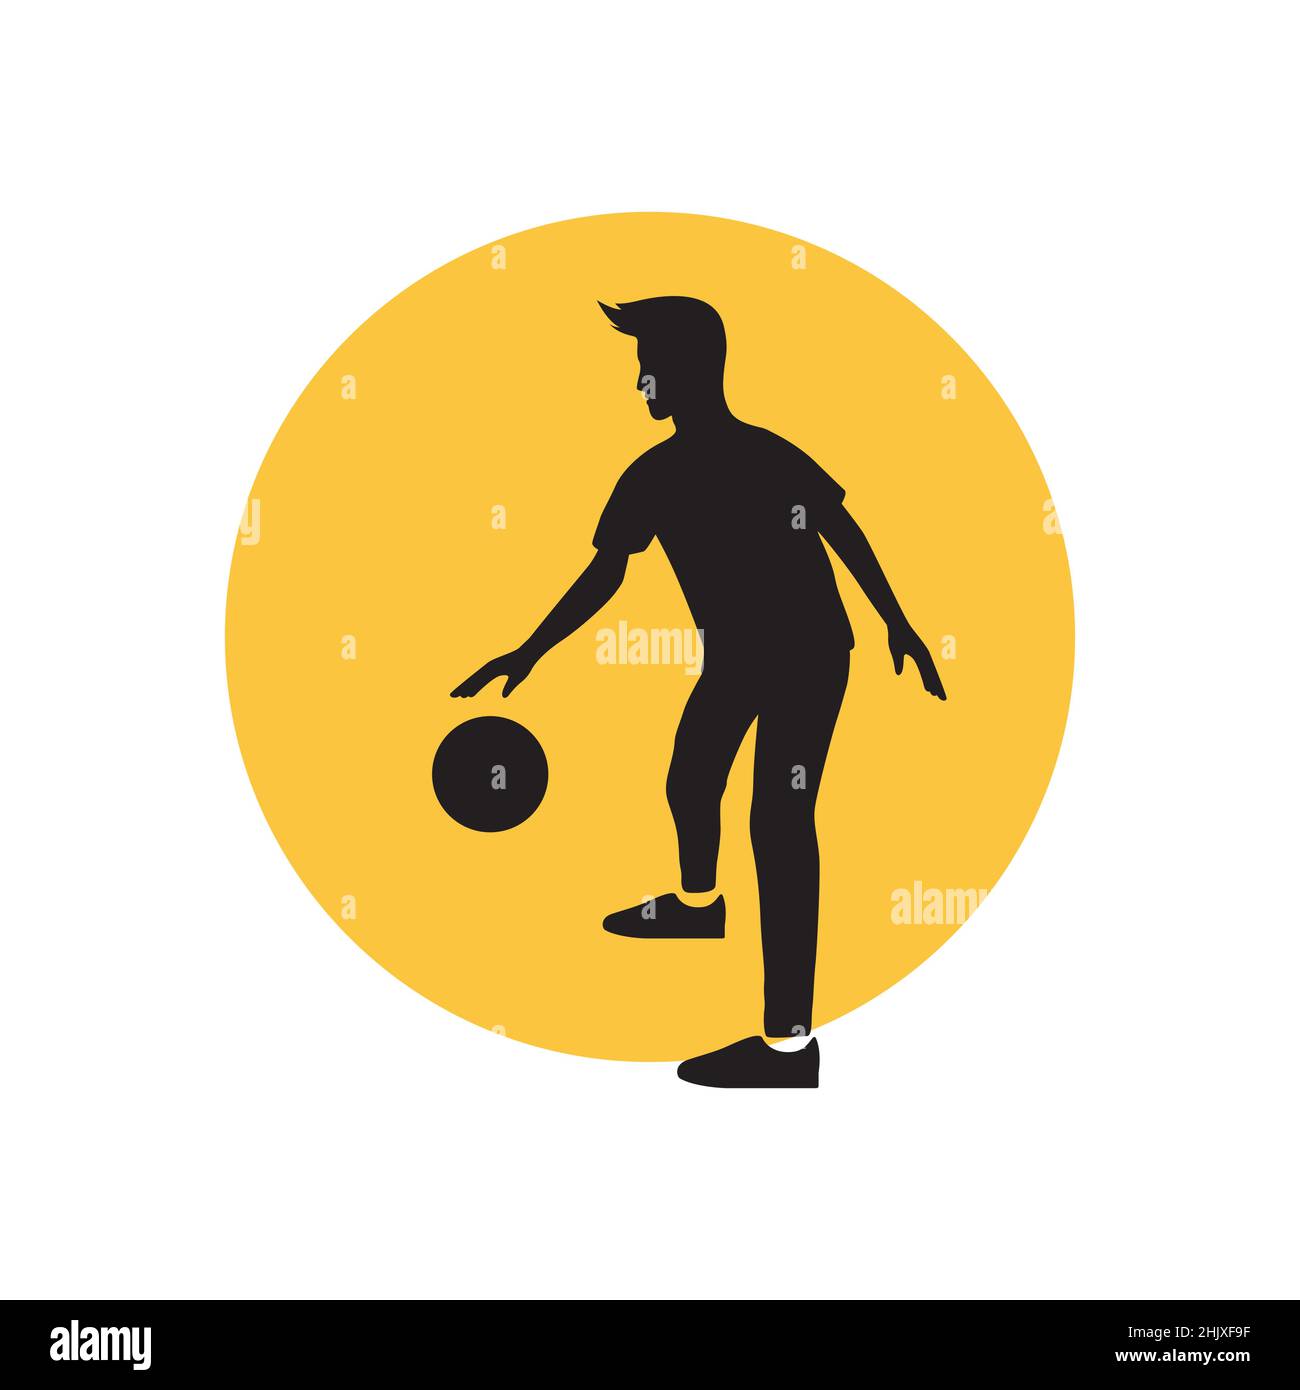 silhouette young man training dribbling basketball with sunset logo design, vector graphic symbol icon illustration creative idea Stock Vector